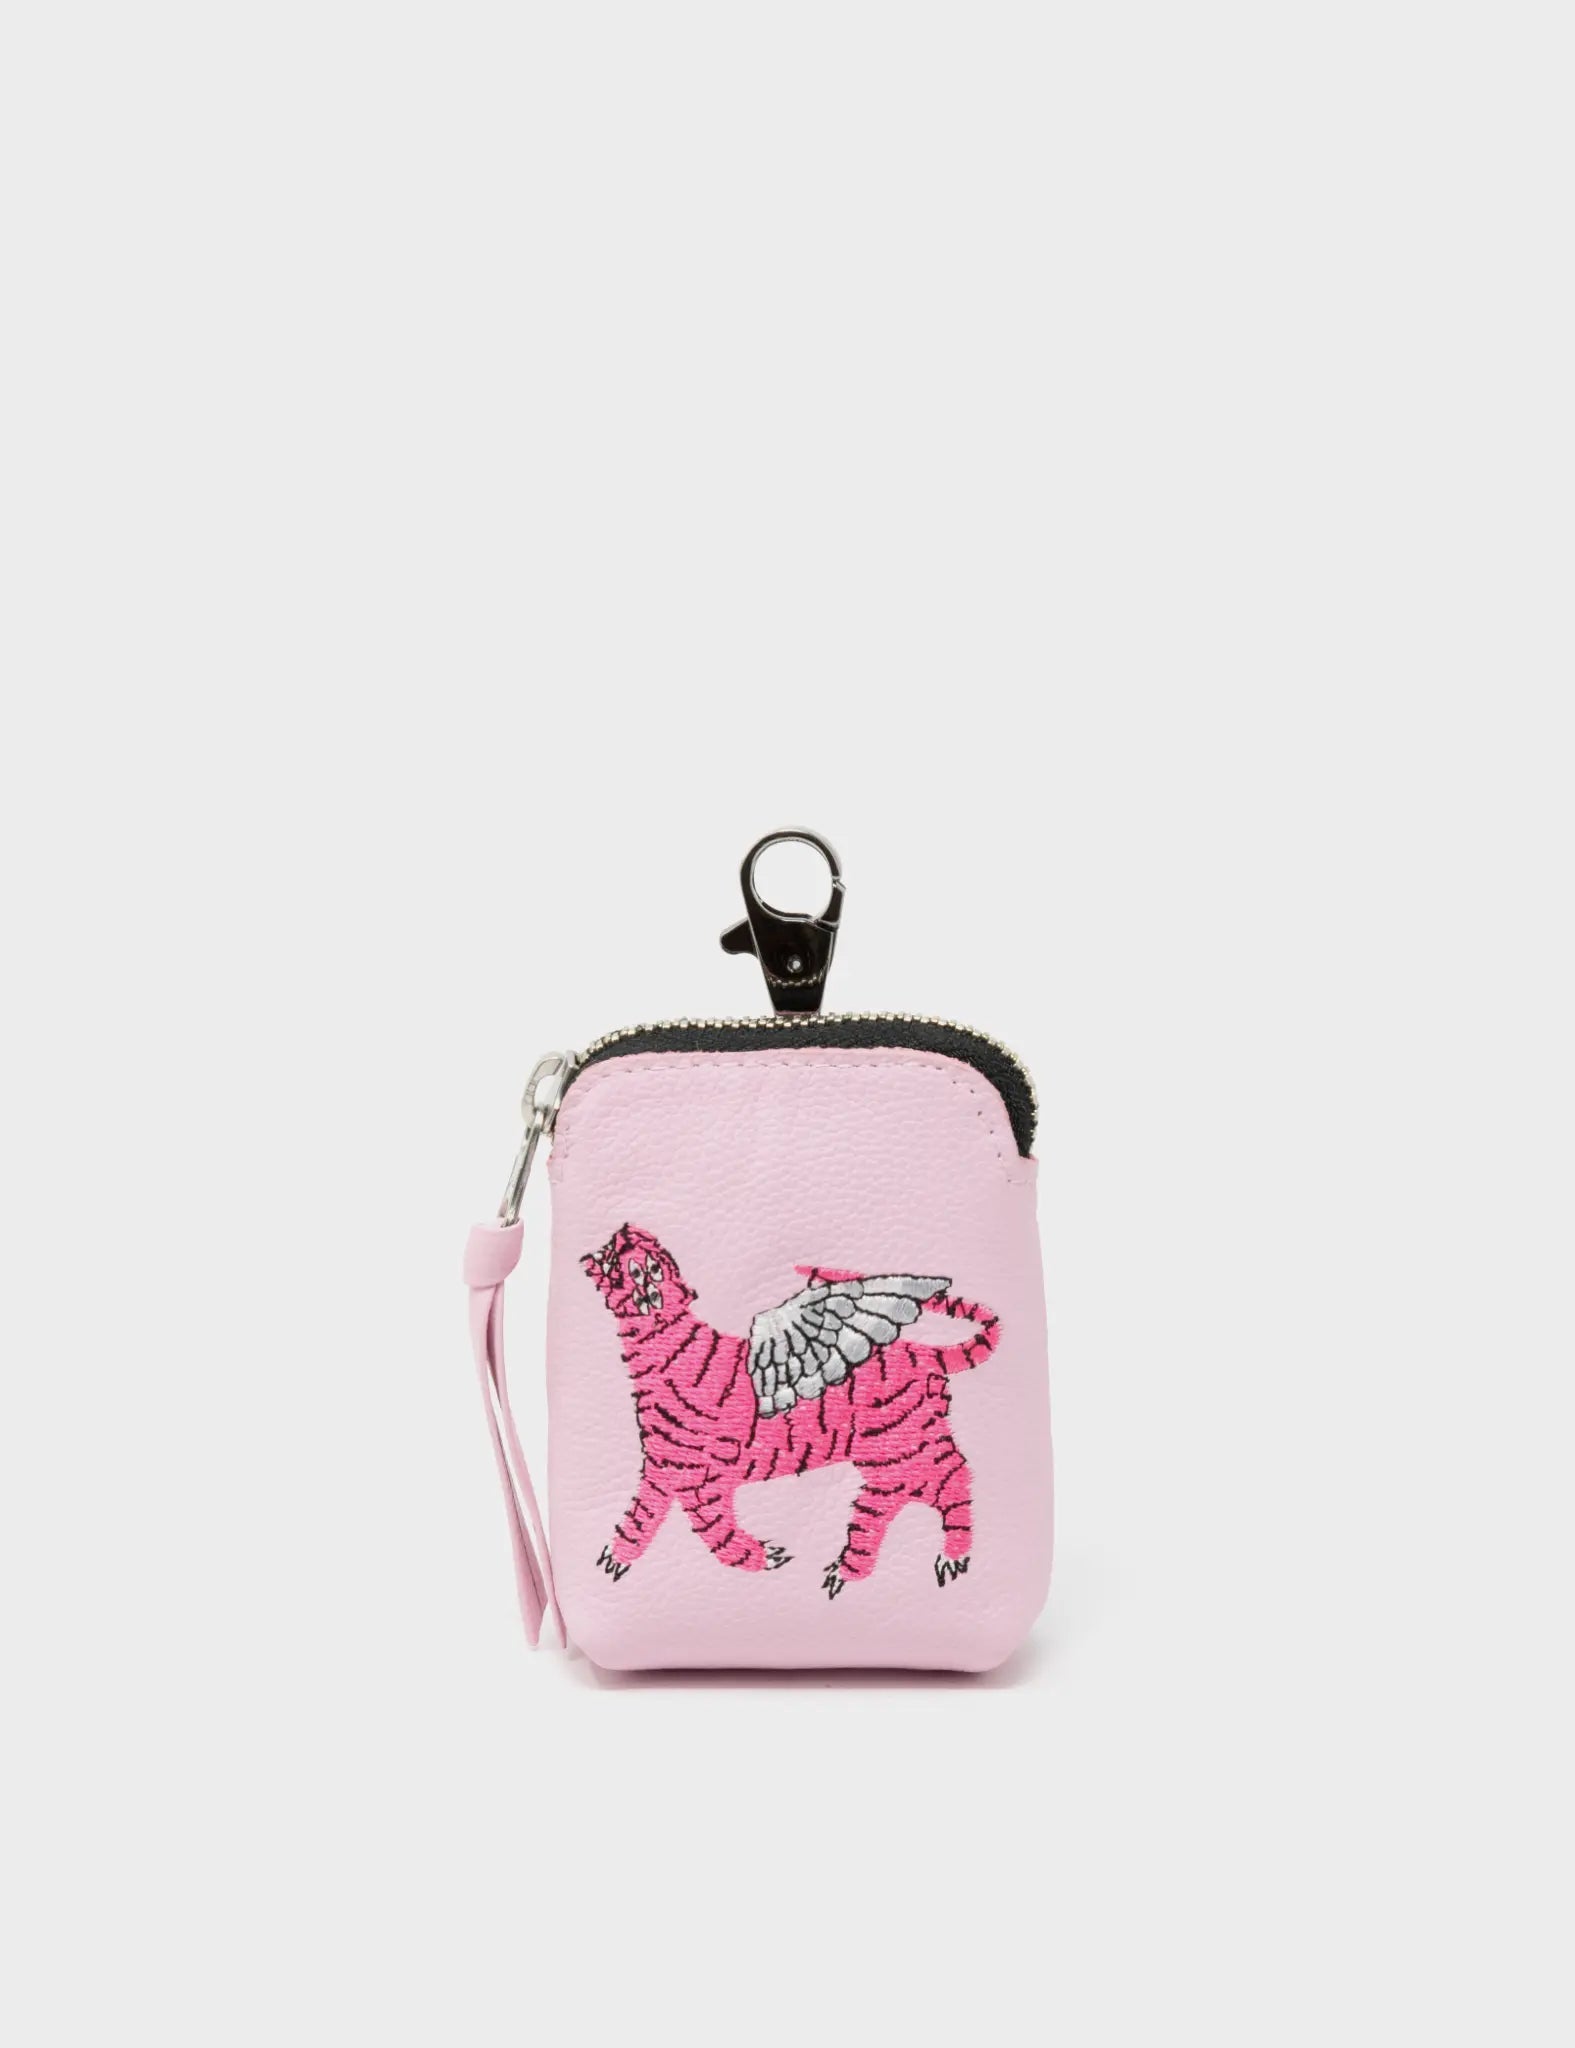 Florence Pouch Charm - Powder Pink Leather Keychain Herocity Lips Prin –  Min & Mon